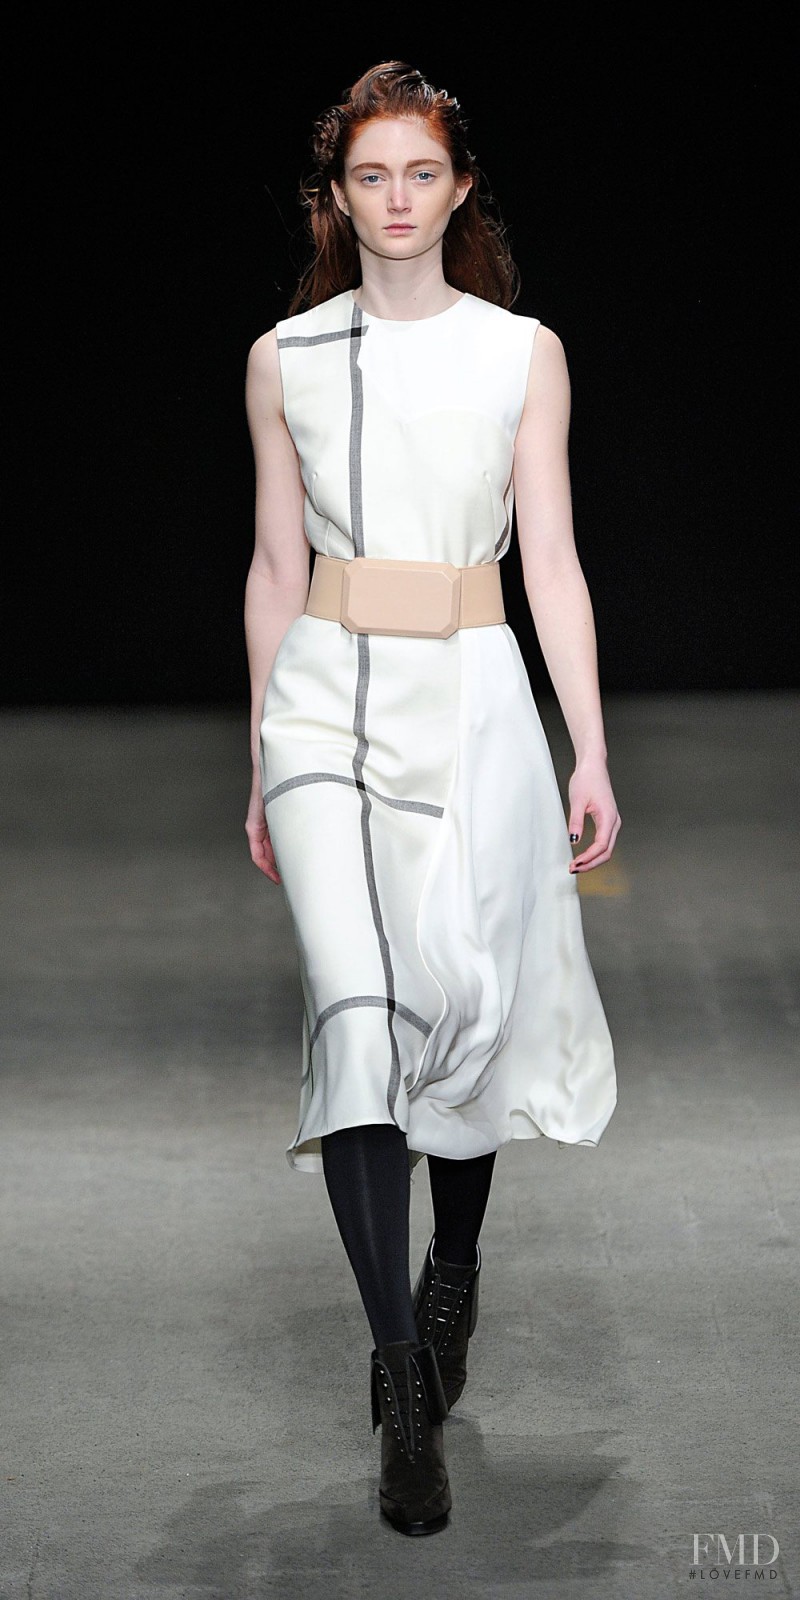 Sophie Touchet featured in  the 3.1 Phillip Lim fashion show for Autumn/Winter 2014